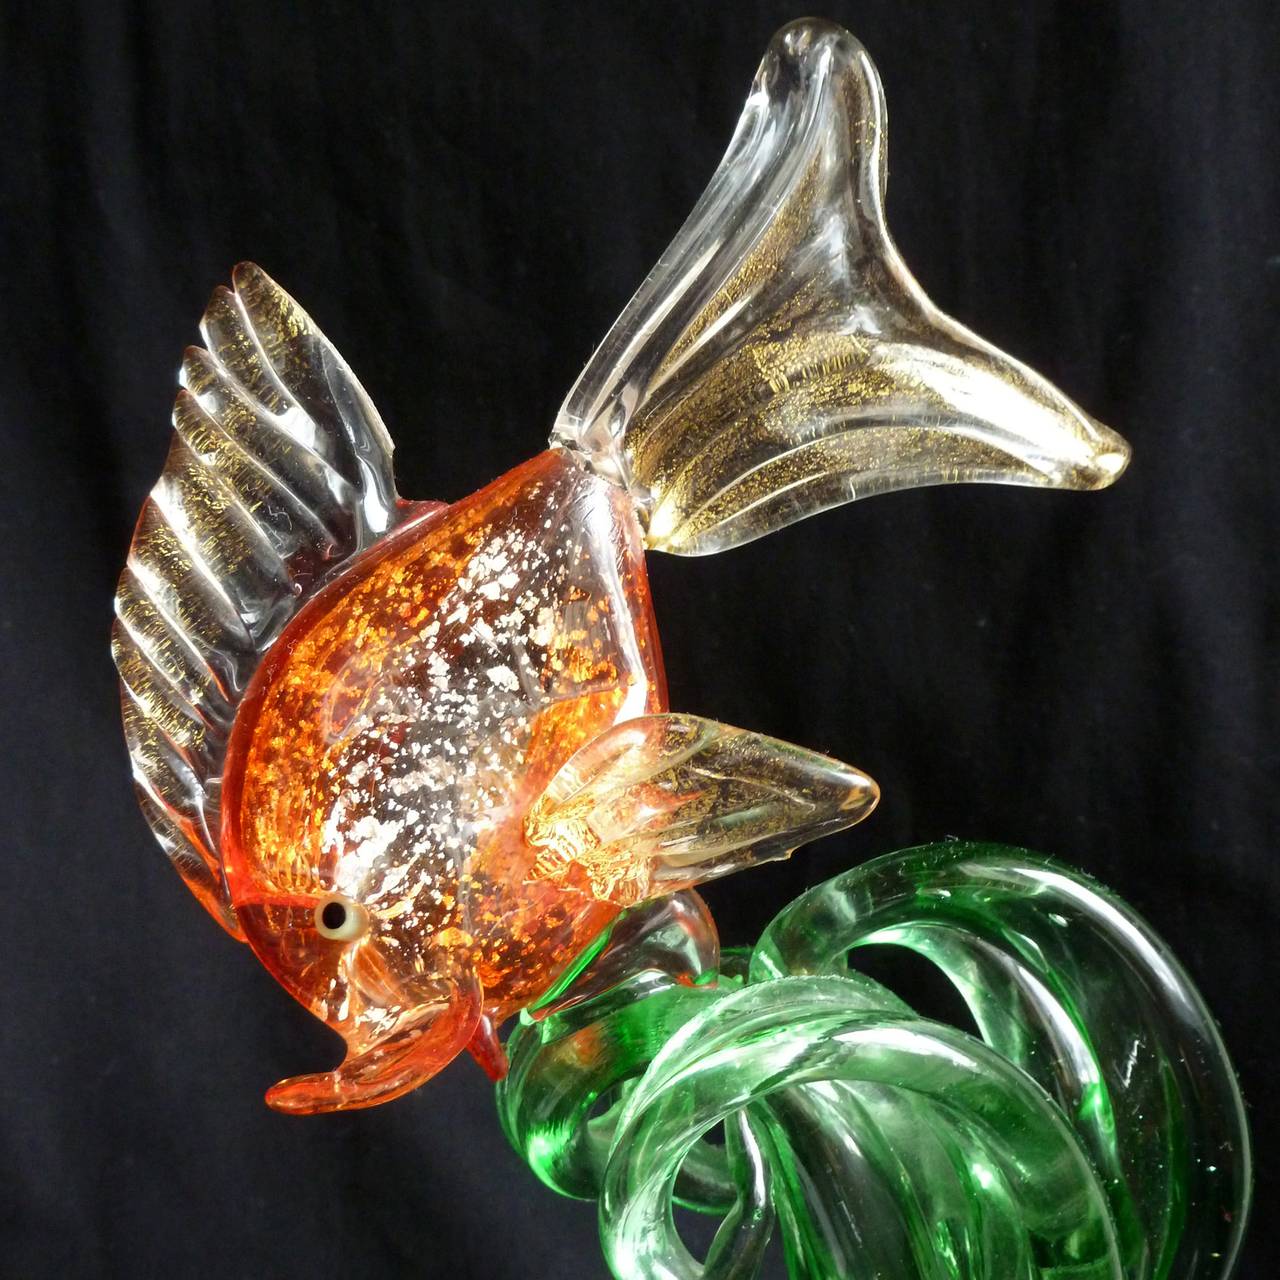 Beautiful vintage Murano hand blown orange, silver and gold flecks Italian art glass fish on wave of algae sculpture. Documented to the Cenedese company. Very unusual 3 dimensional figure. Can be used as a display piece on any table. Mid-century